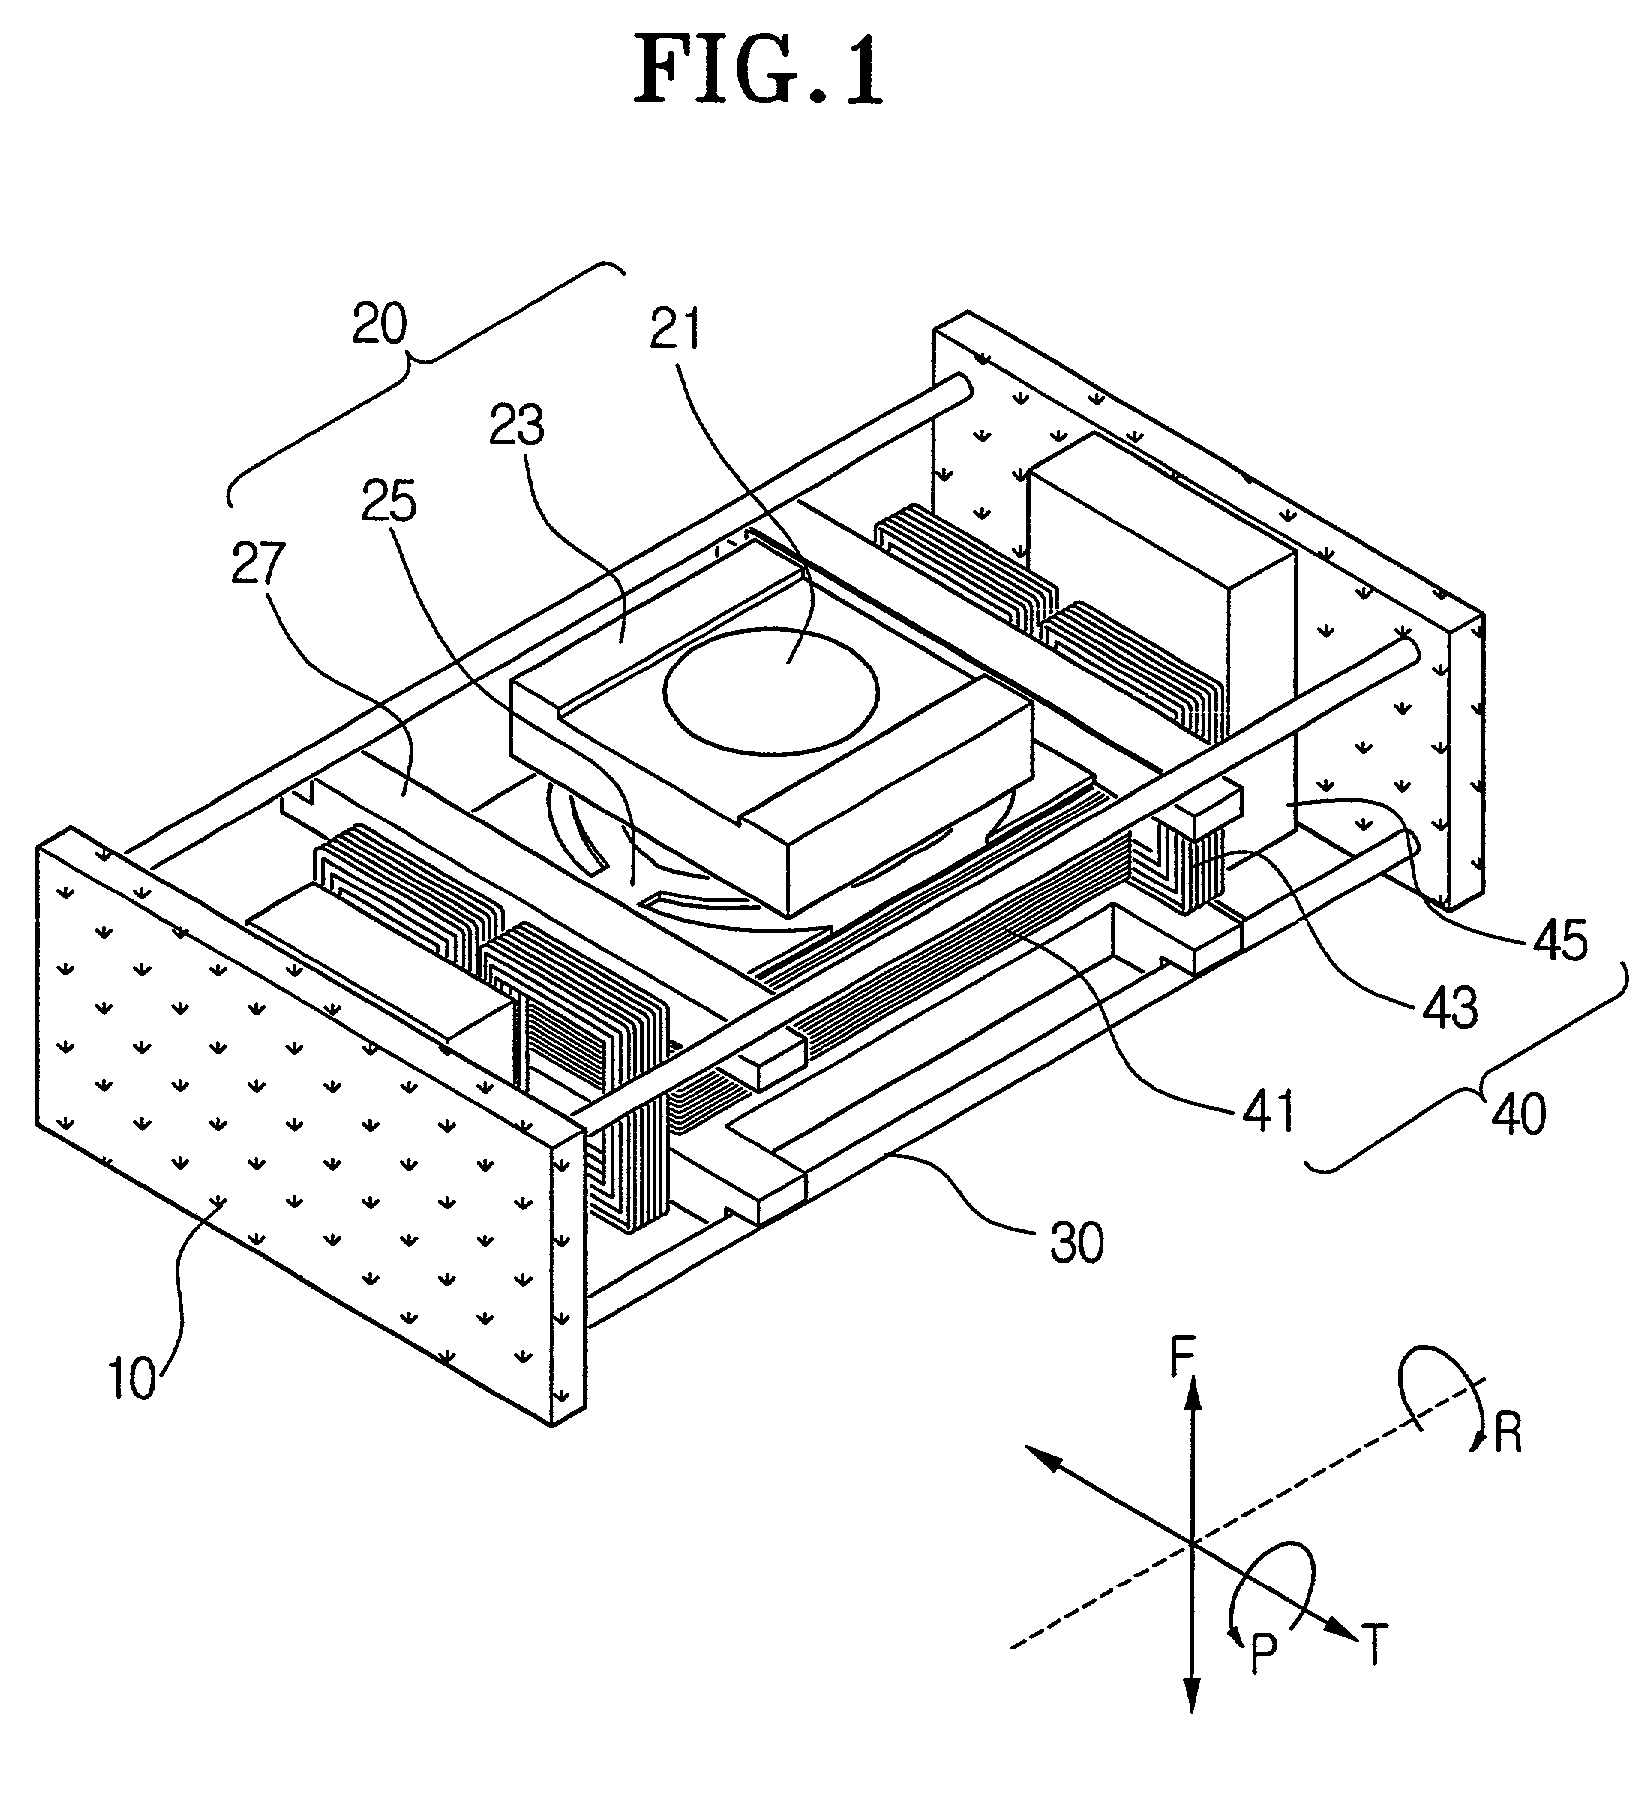 Optical pickup apparatus for optical disk drive and having a flexured floating slider